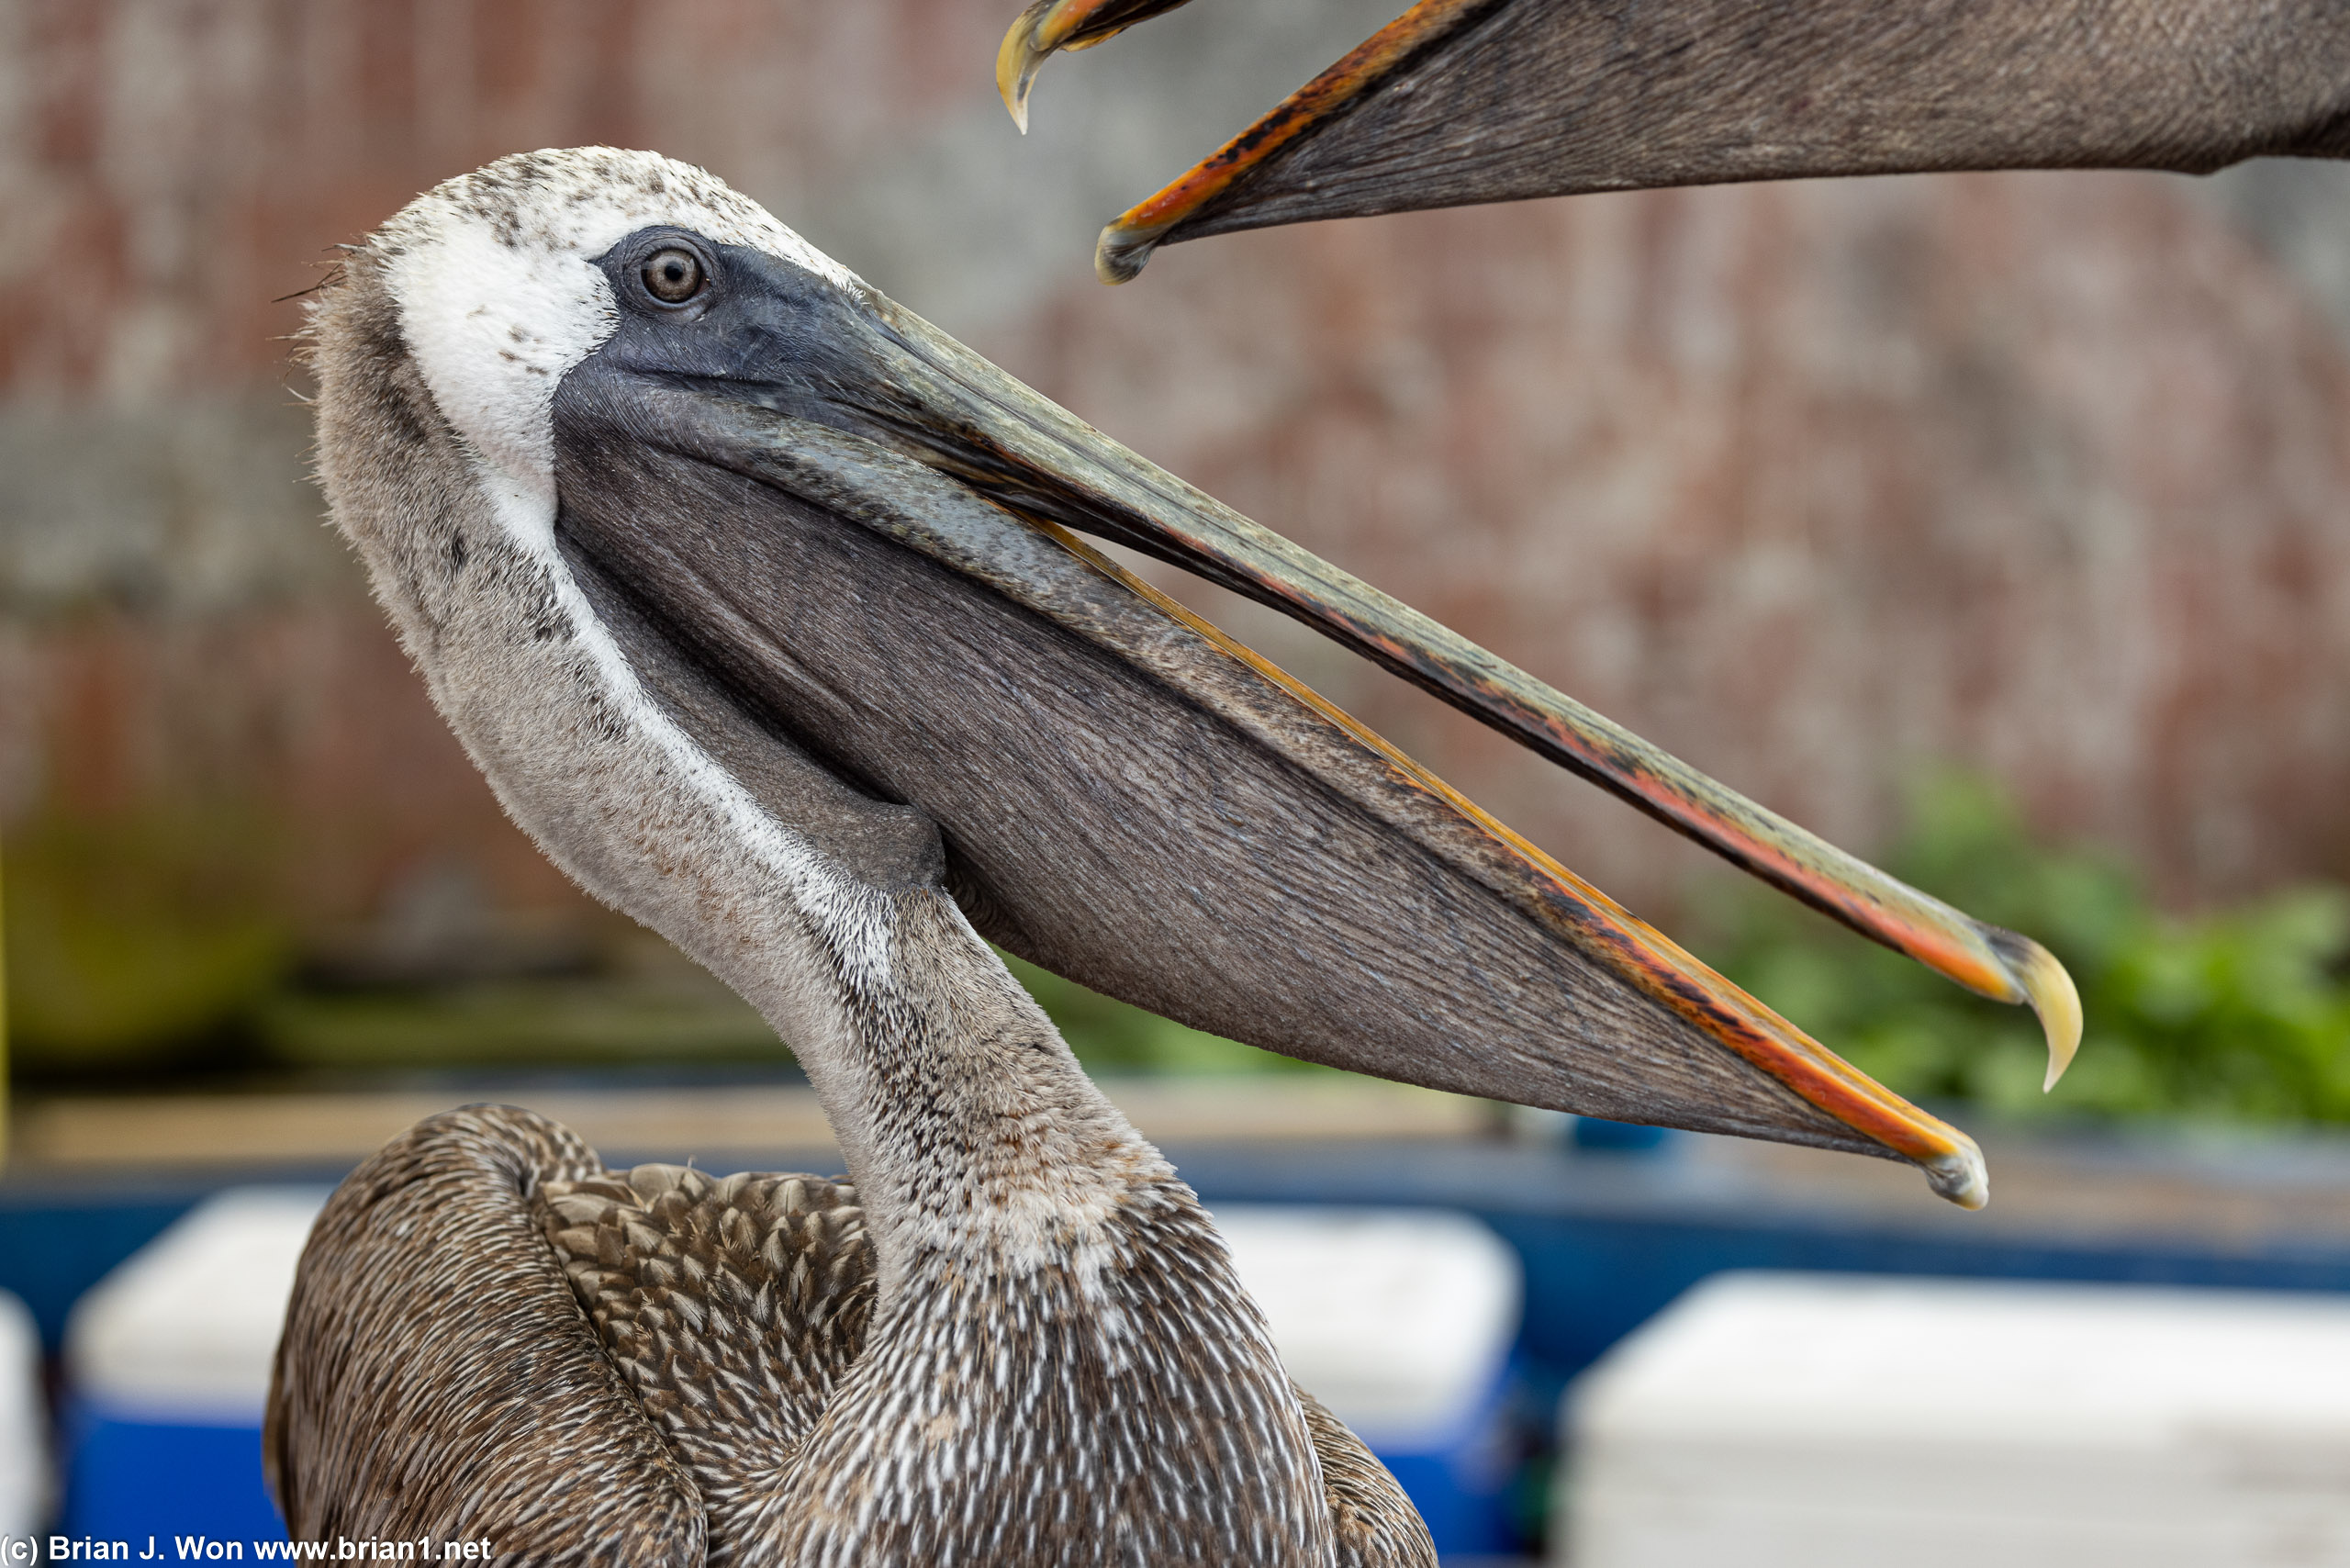 Pelicans fighting at the fish market.